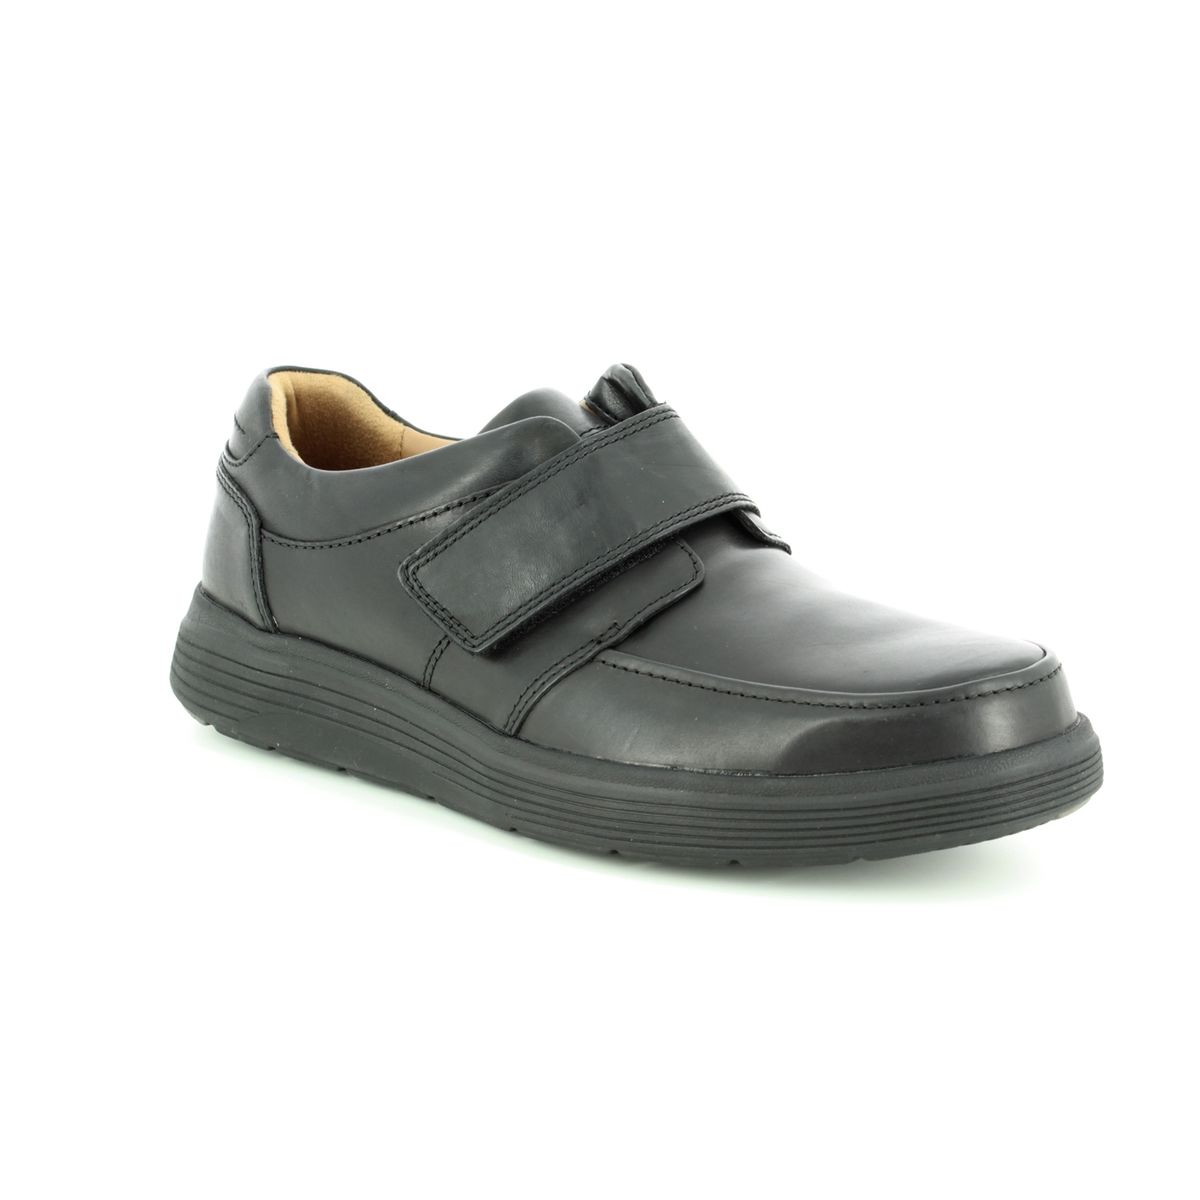 Clarks Un Abode Strap Black Leather Mens Comfort Shoes 3698-68H In Size 9.5 In Plain Black Leather H Width Fitting Extra Wide